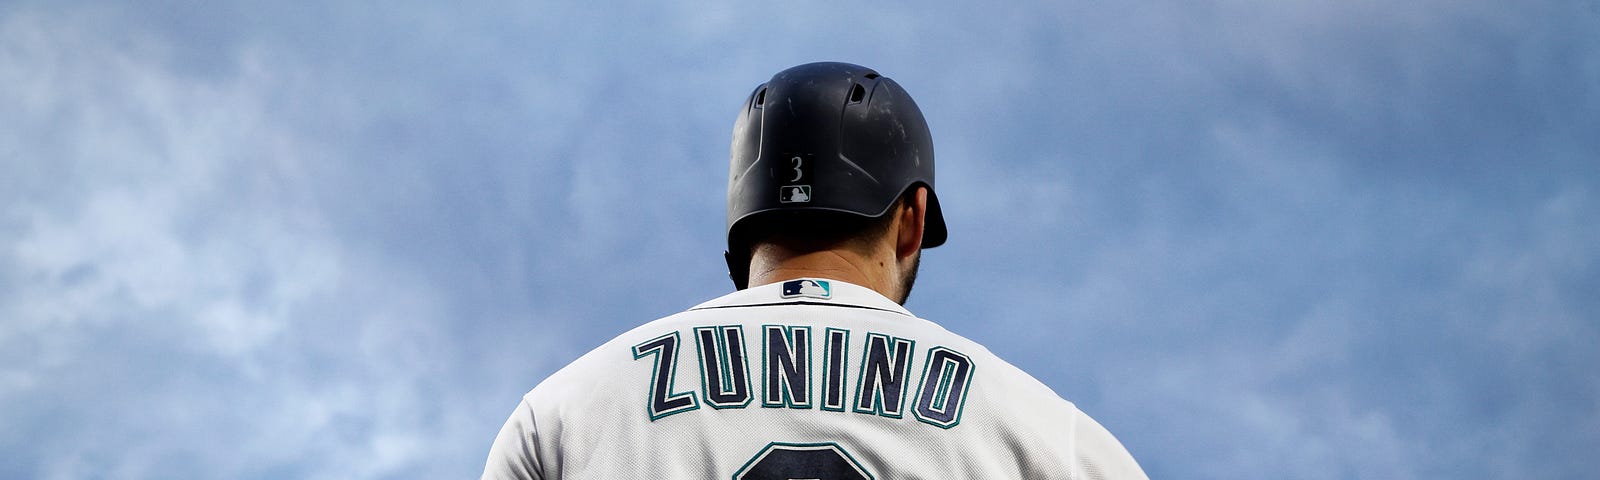 Mike Zunino, From the Corner of Edgar & Dave